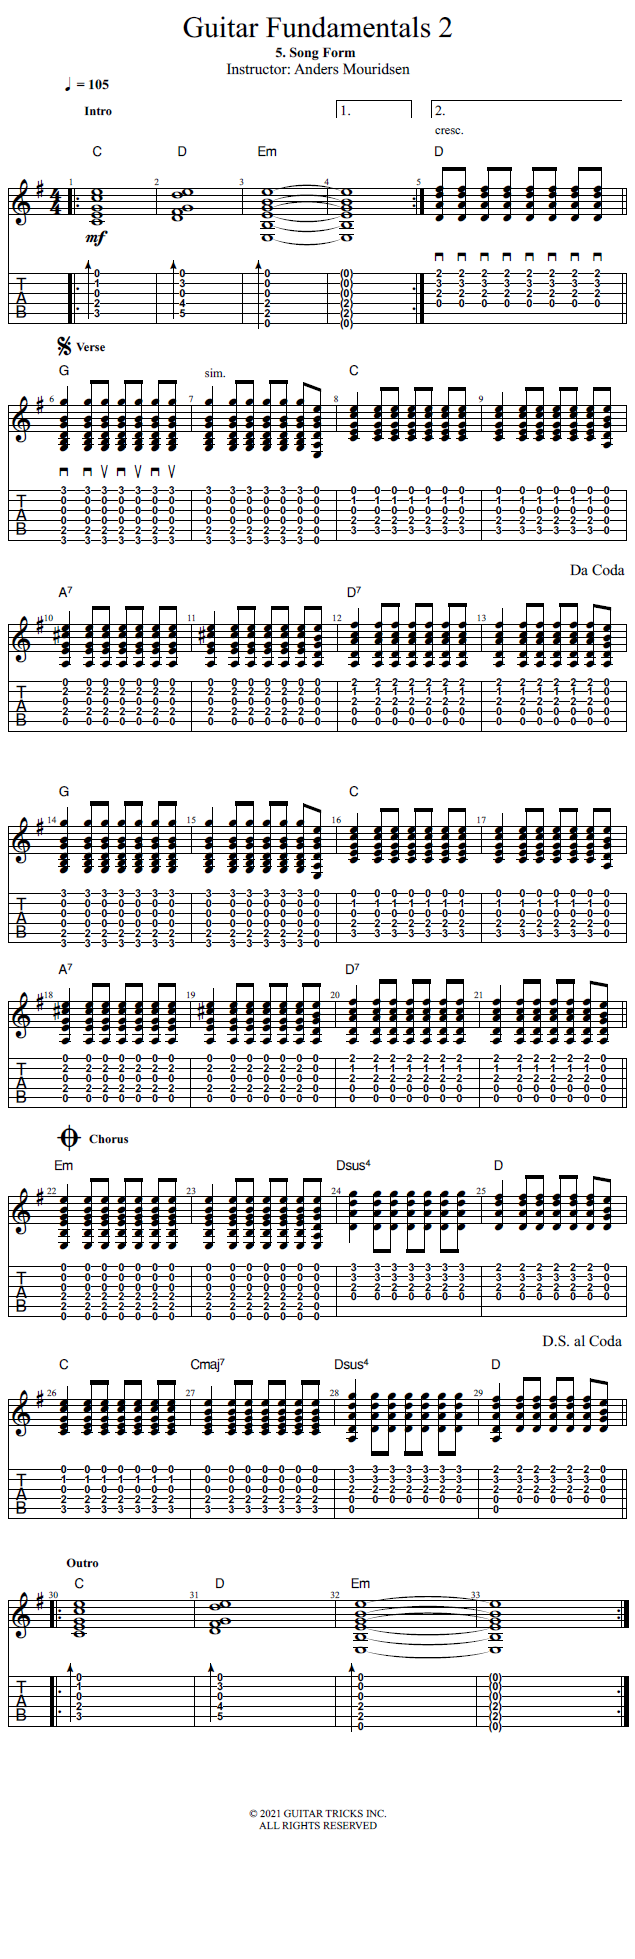 Song Form song notation